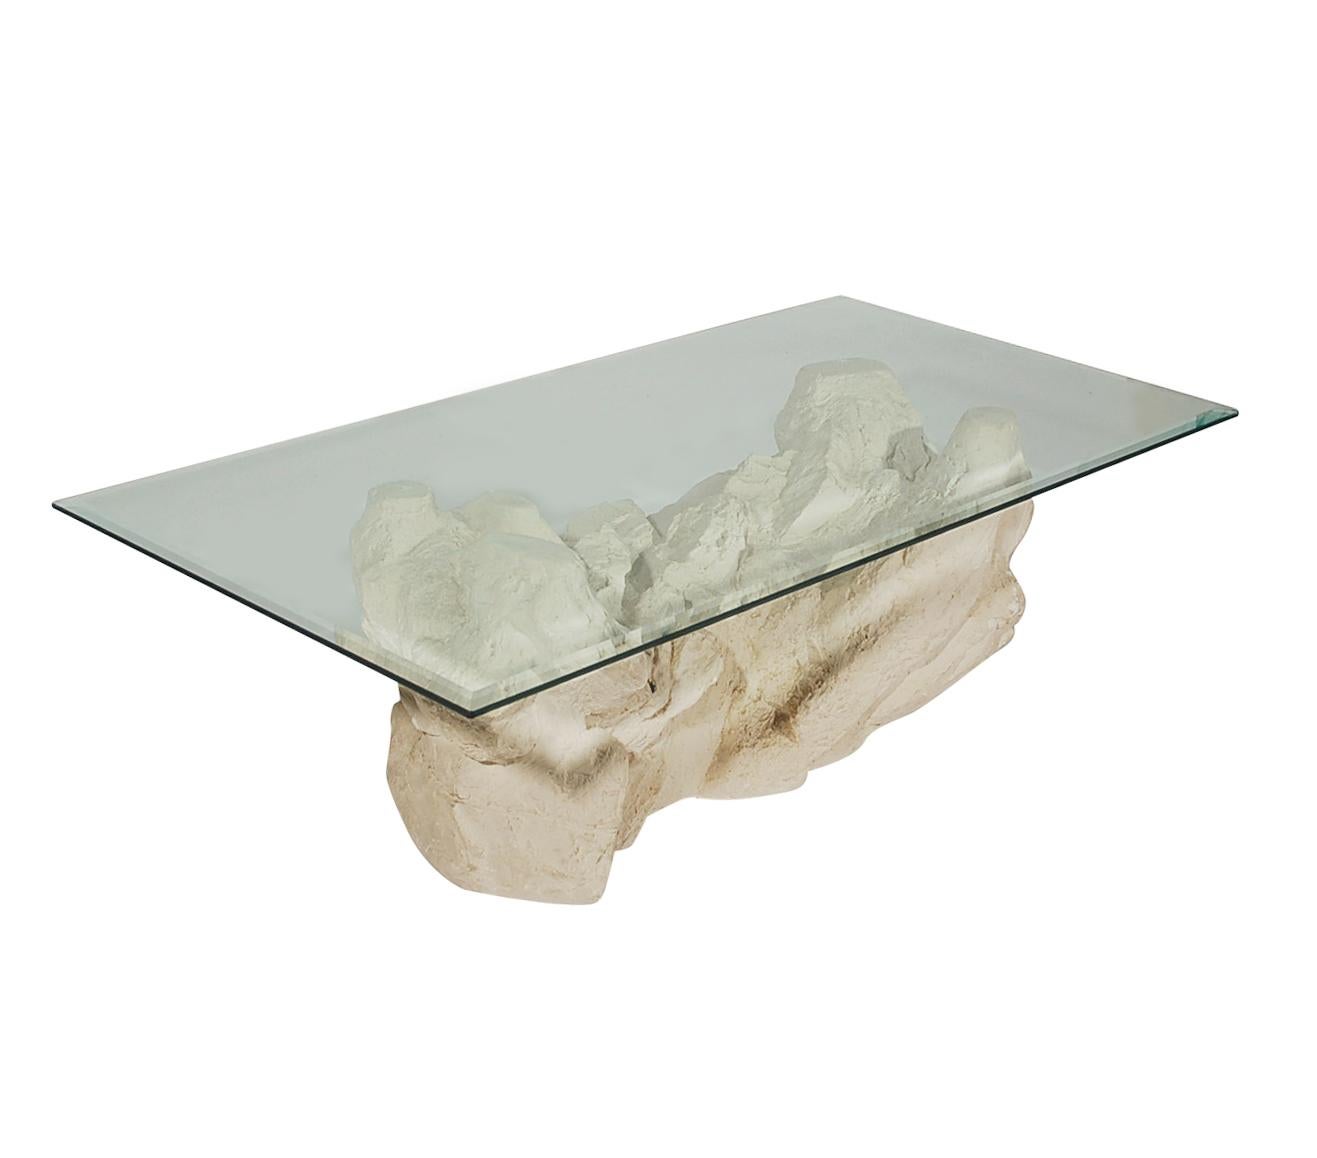 A sculptural faux rock formation table made by Sirmos in the 1970s. It features a plaster molded rock formation base with a clear glass top.